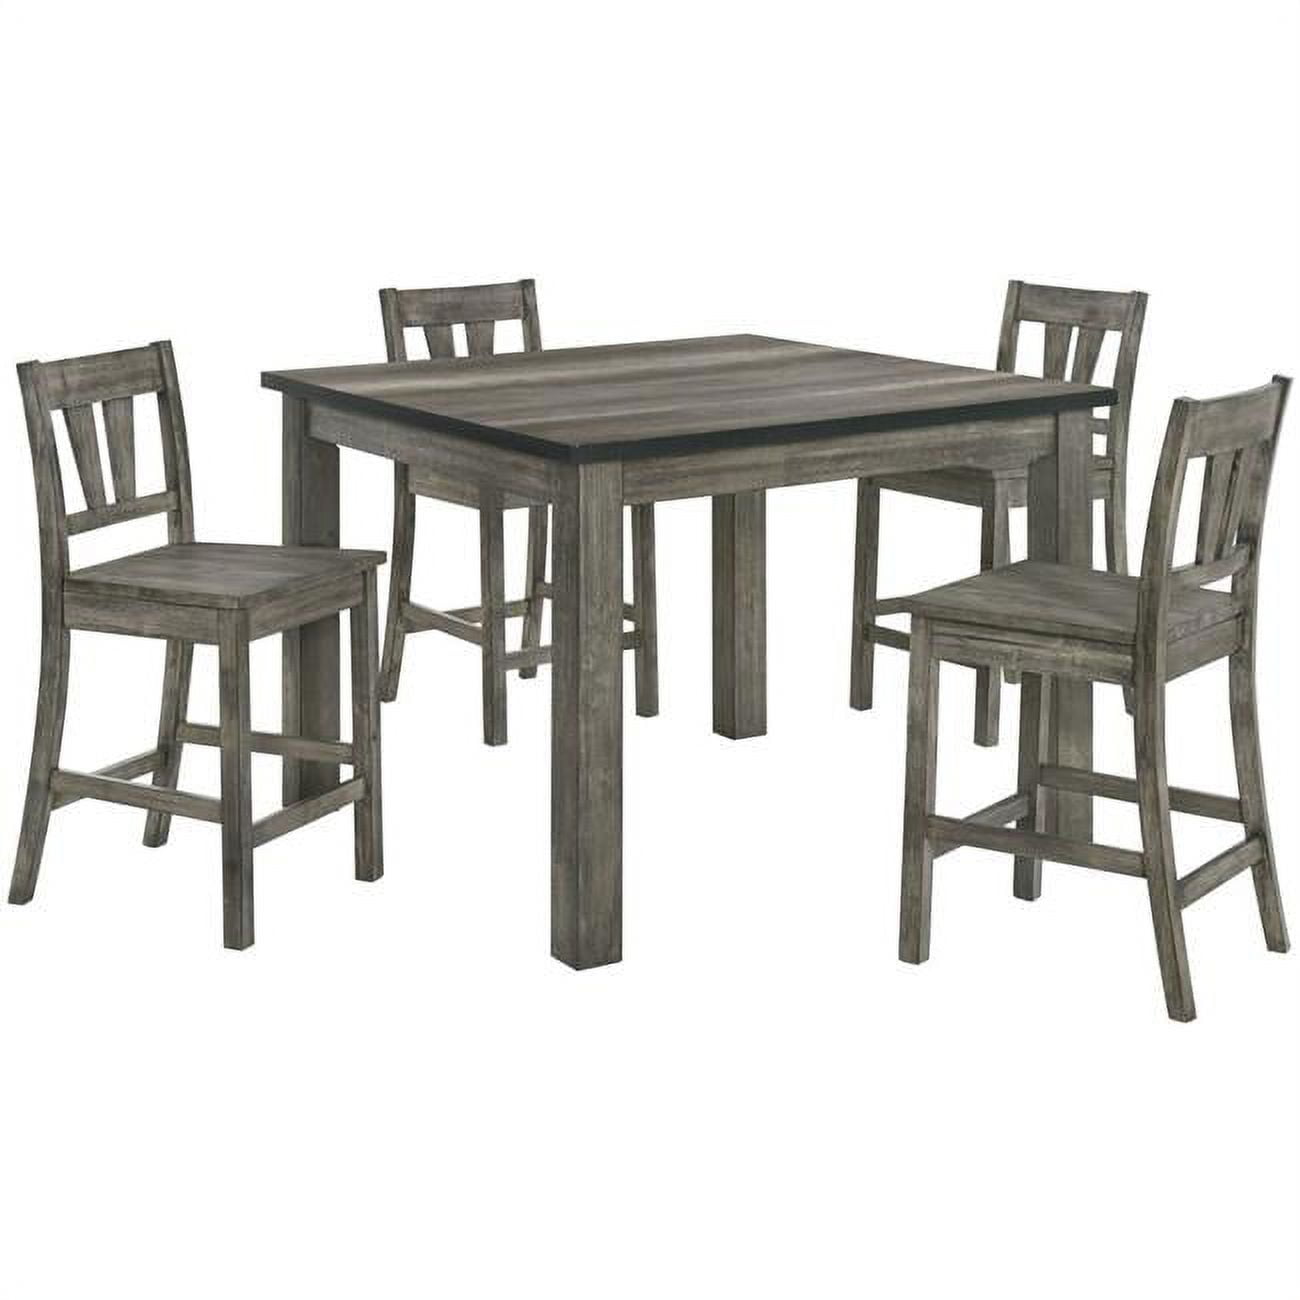 Cmf 982006-wd5pc-wg Counter Height Table - 4 Wood Seat Chairs Dining Set - 5 Piece